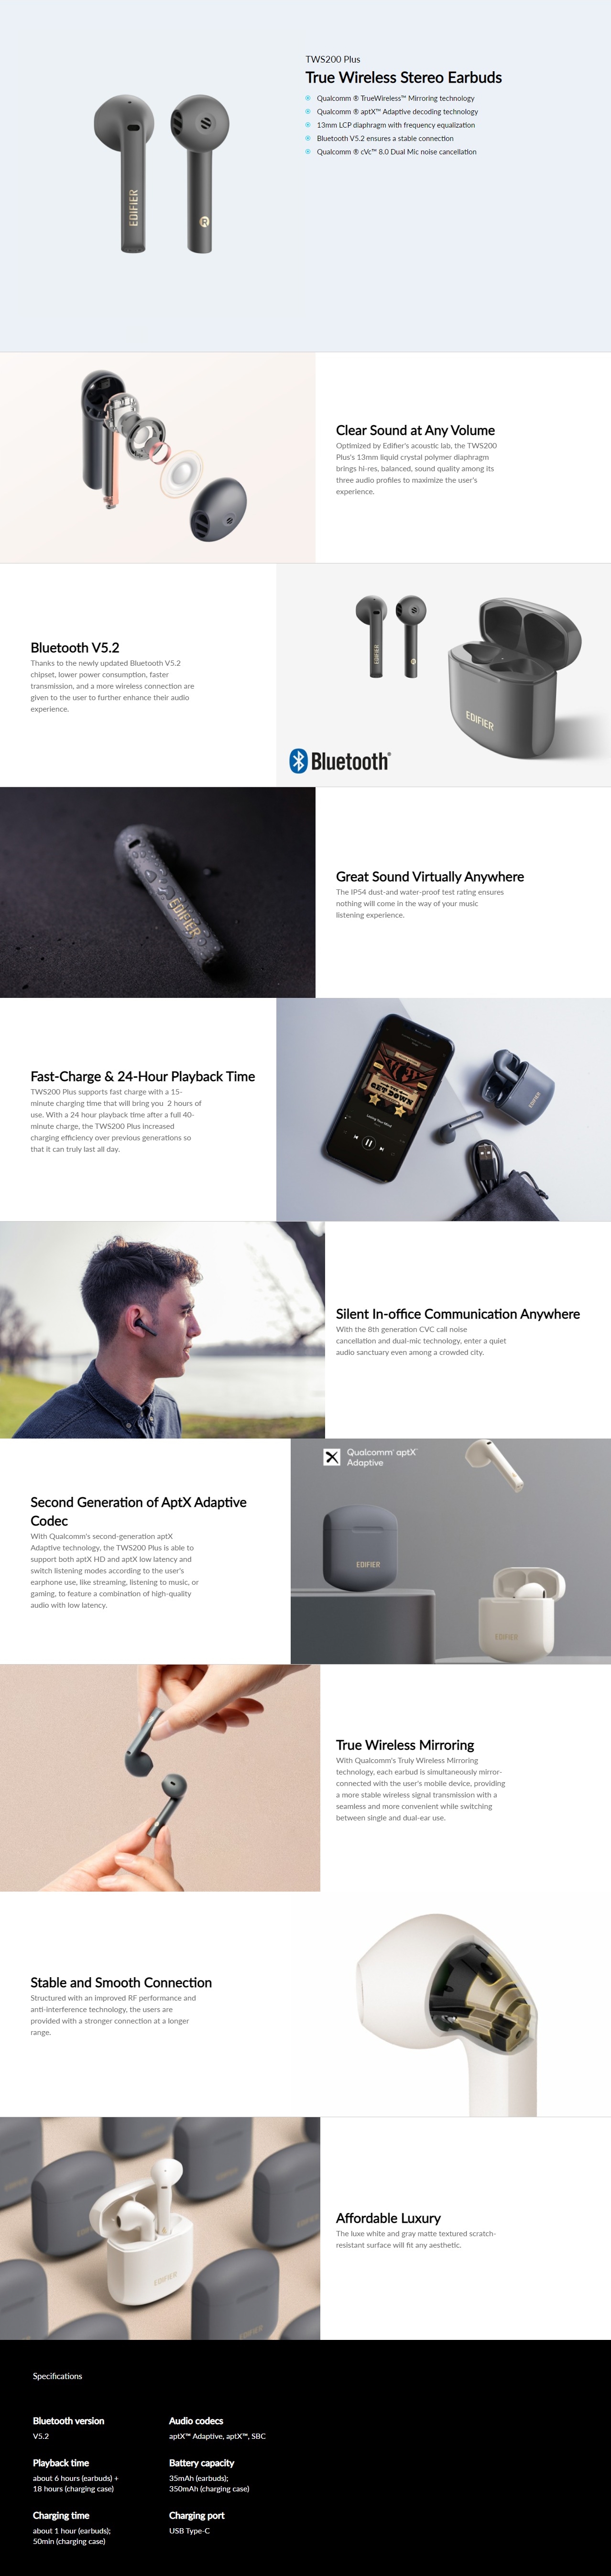 A large marketing image providing additional information about the product Edifier TWS200 Plus Stereo Bluetooth Earbuds - Grey - Additional alt info not provided